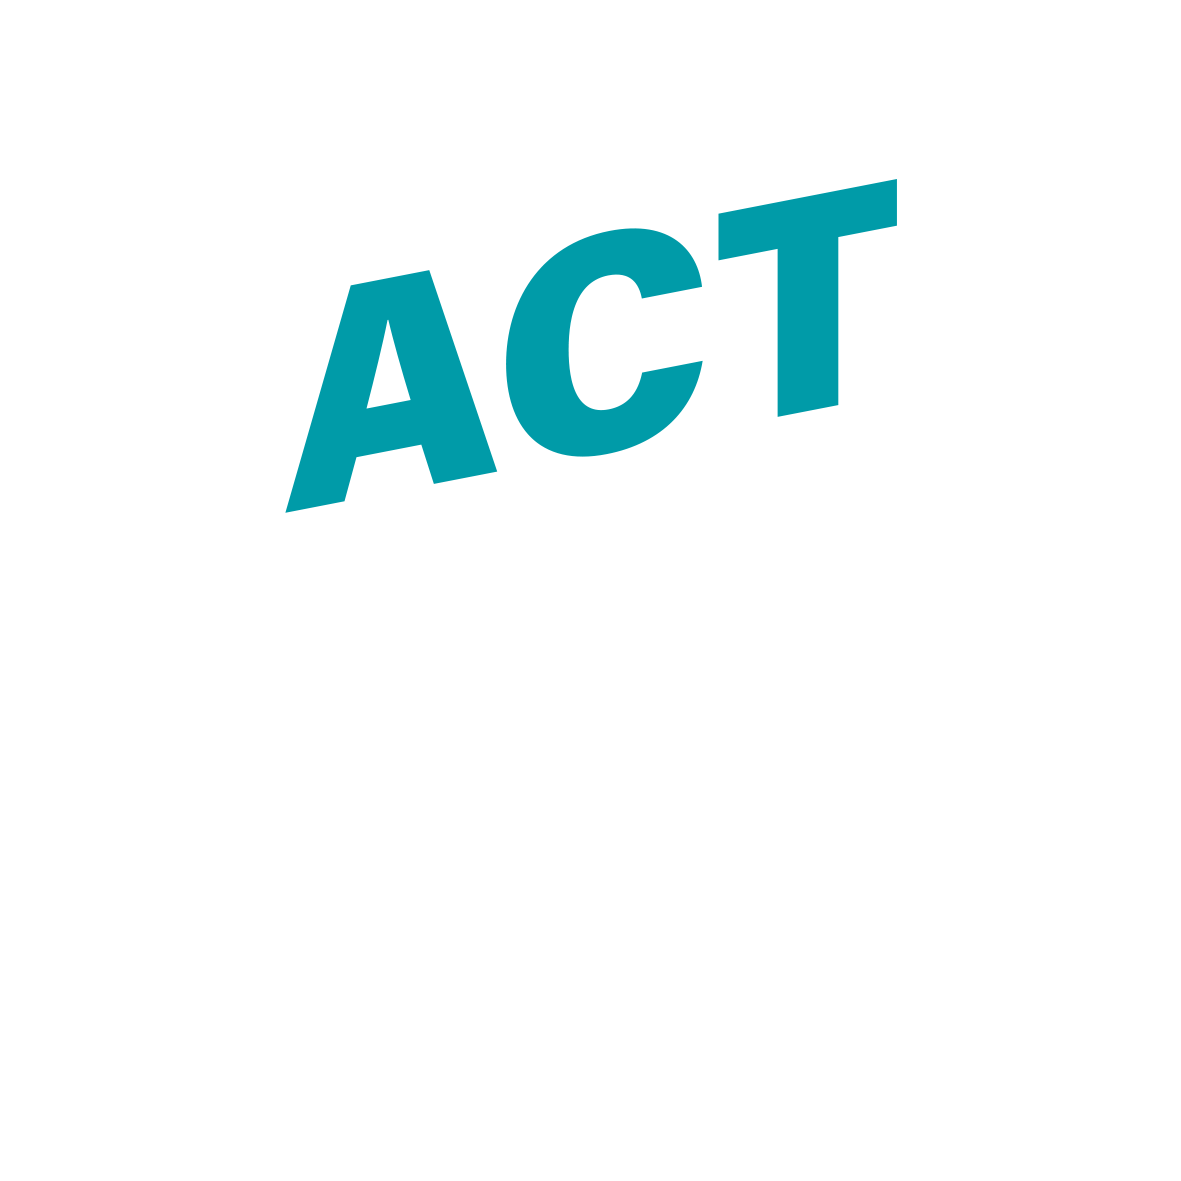 Act on NCDS - Investment logo teal negative